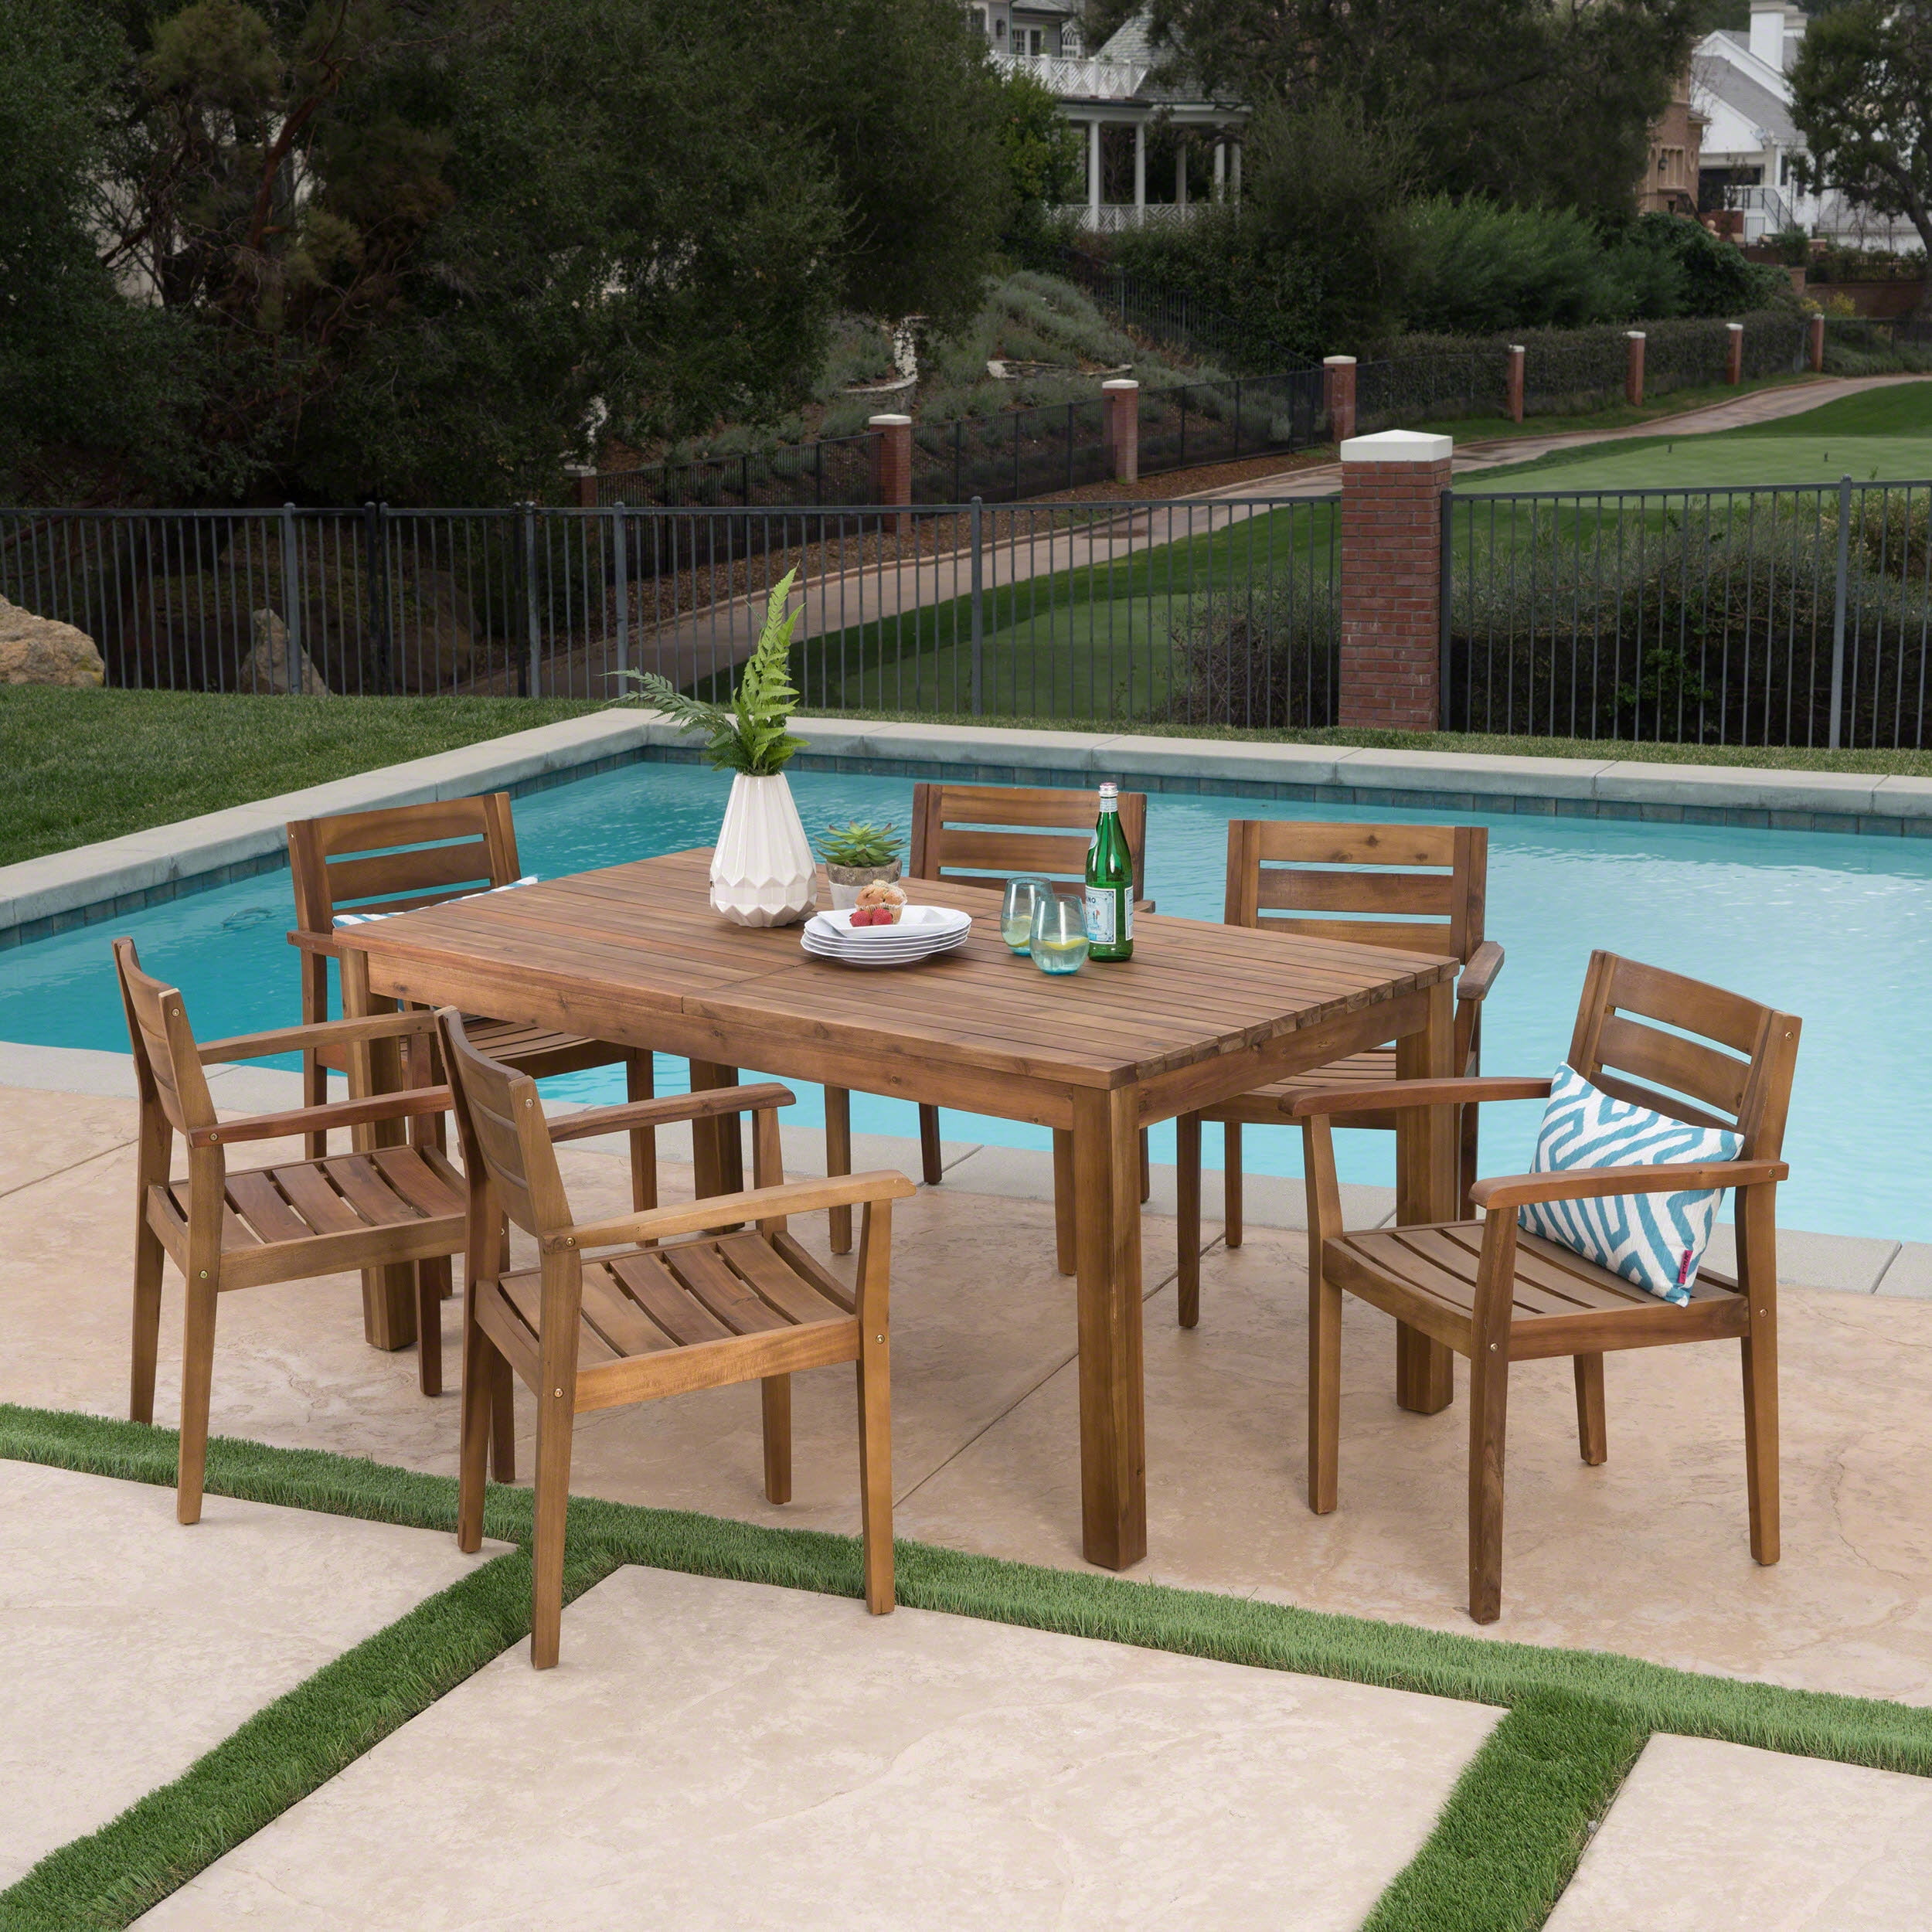 Experience Outdoor Dining With A Teak Outdoor Dining Table